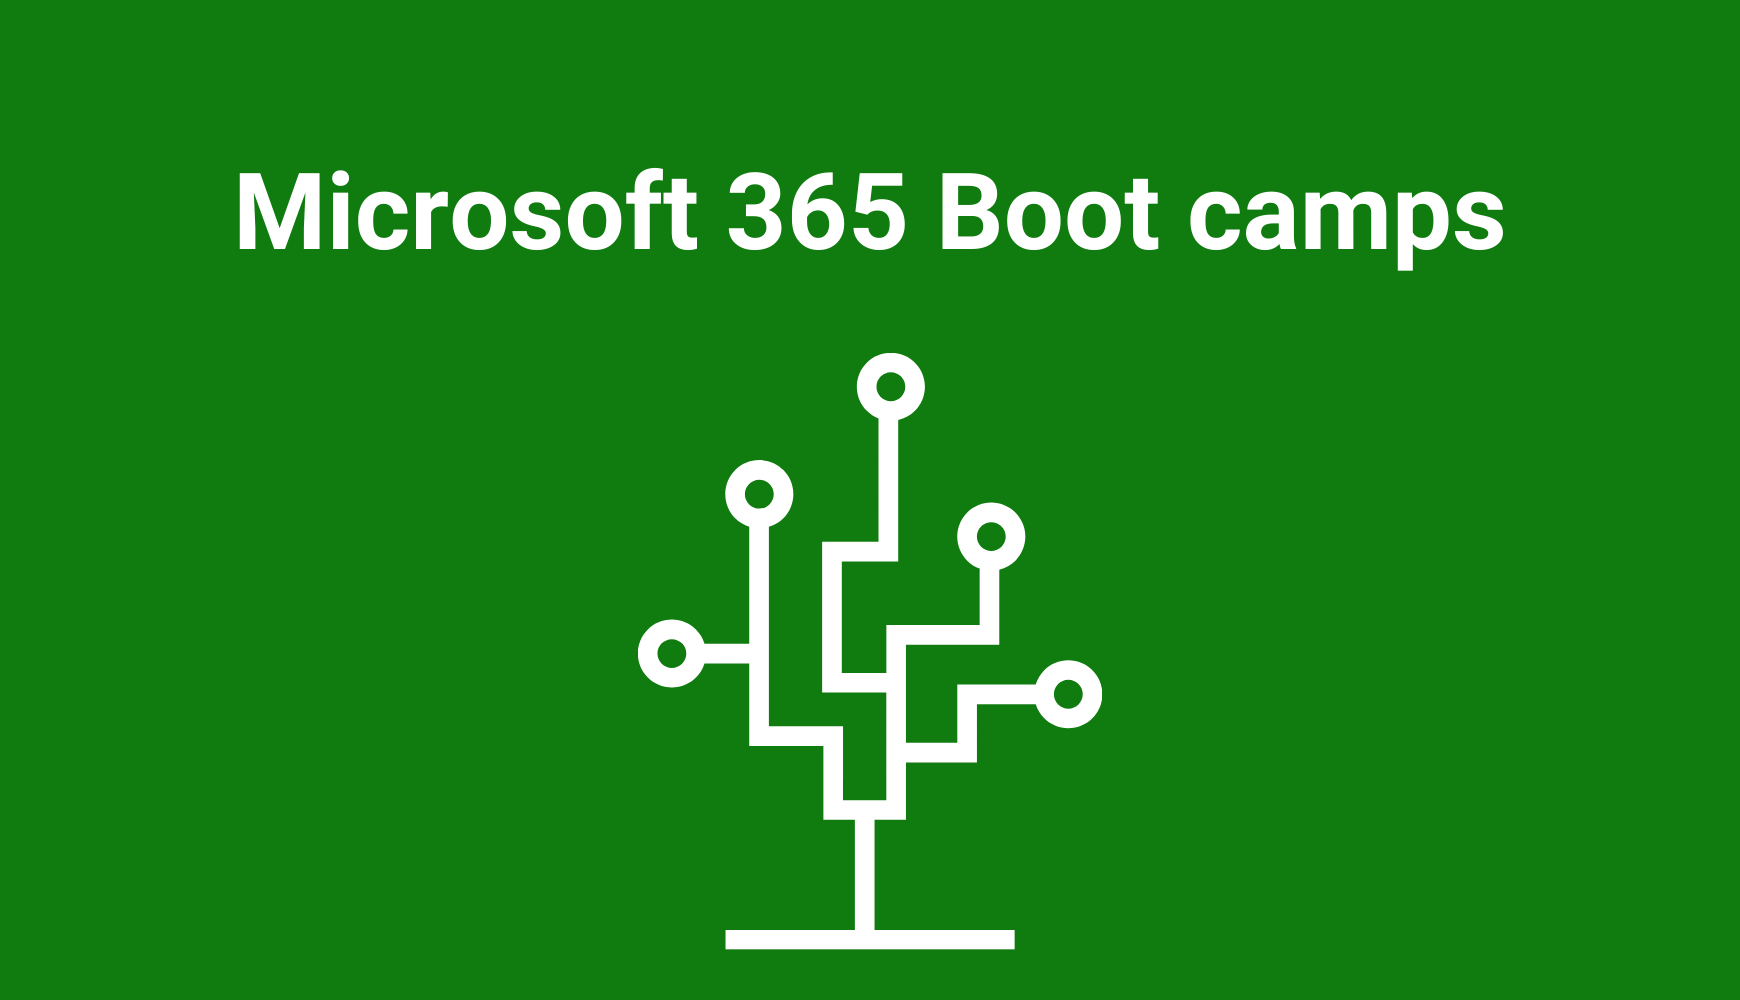 Microsoft 365 Boot Camps